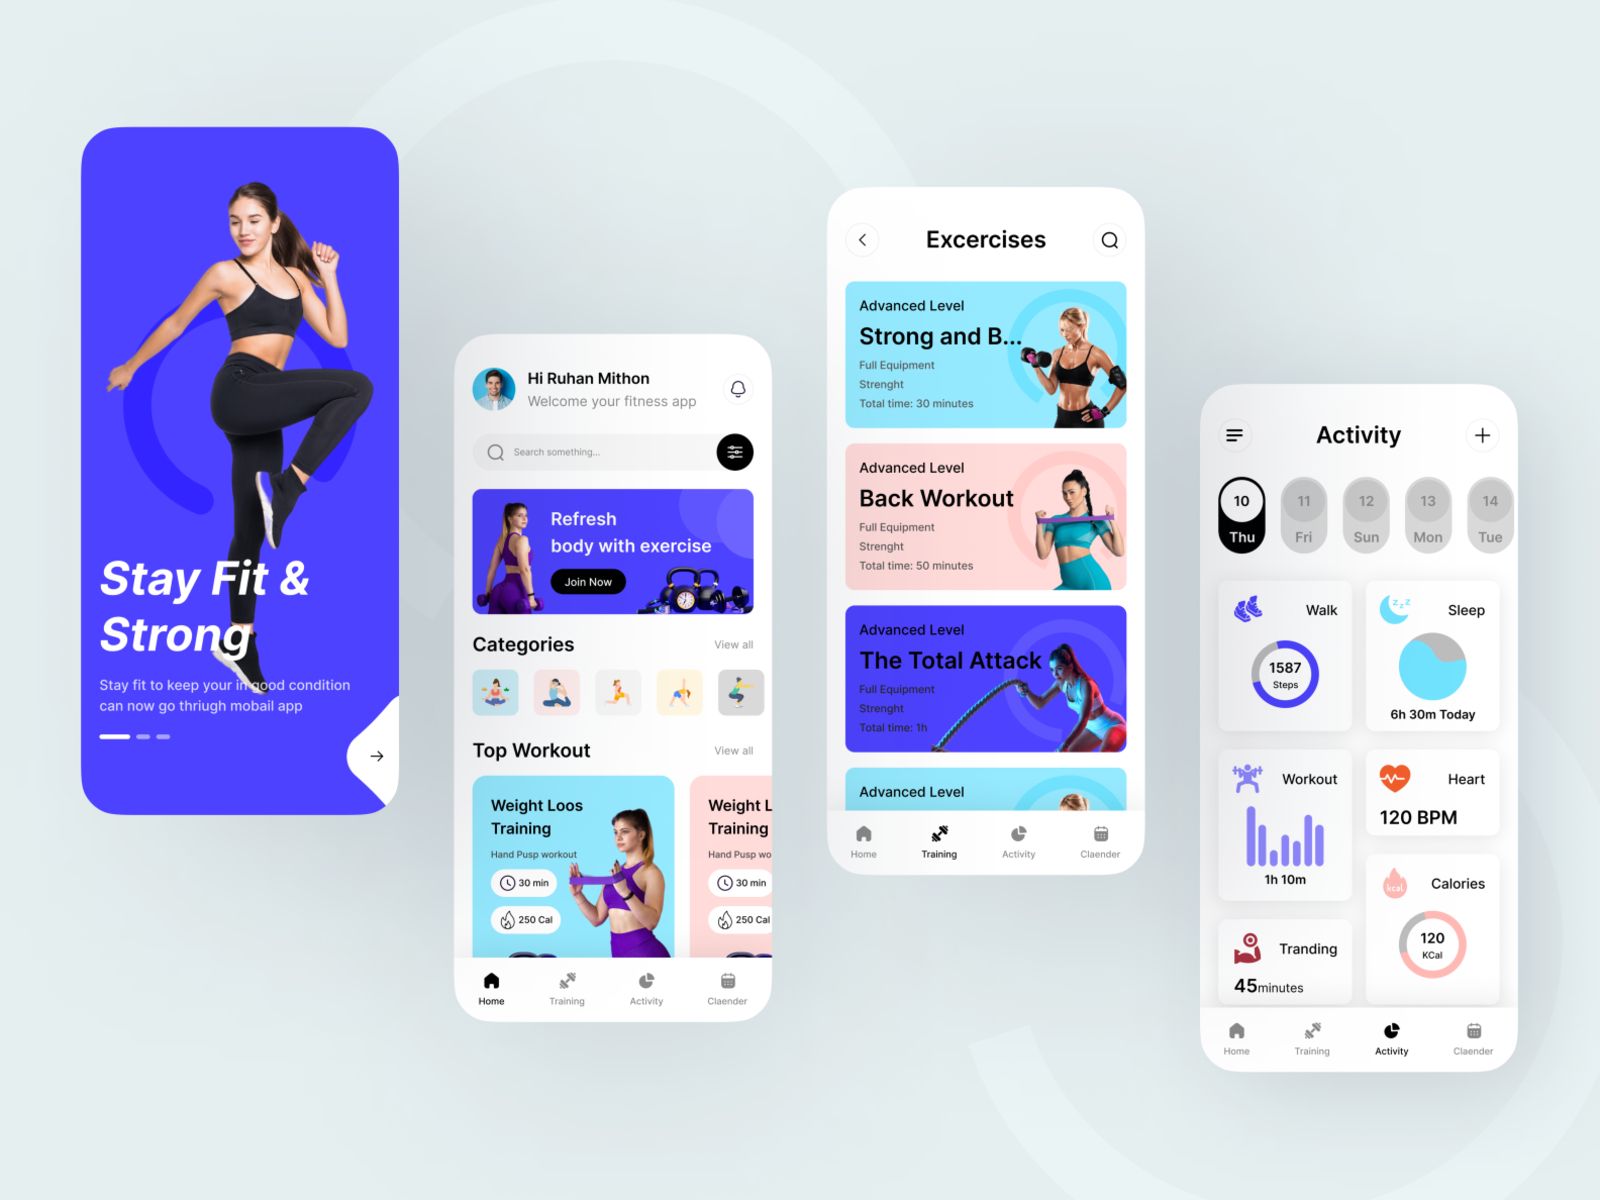 The fitness app updates improve the fitness app's performance